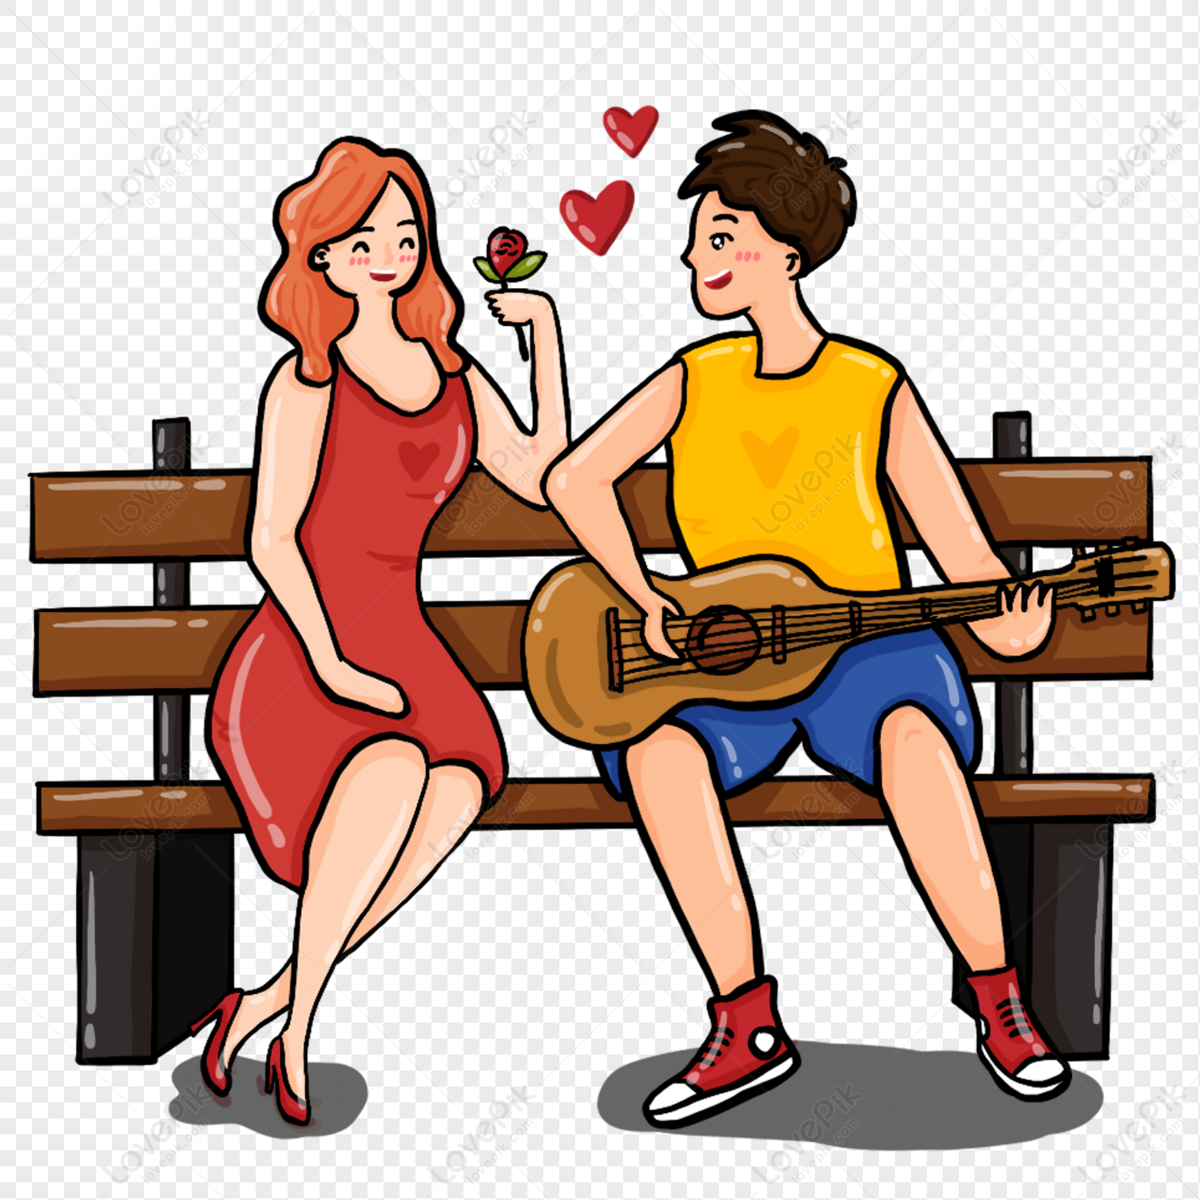 Loving and singing. Girl Play Song PNG.